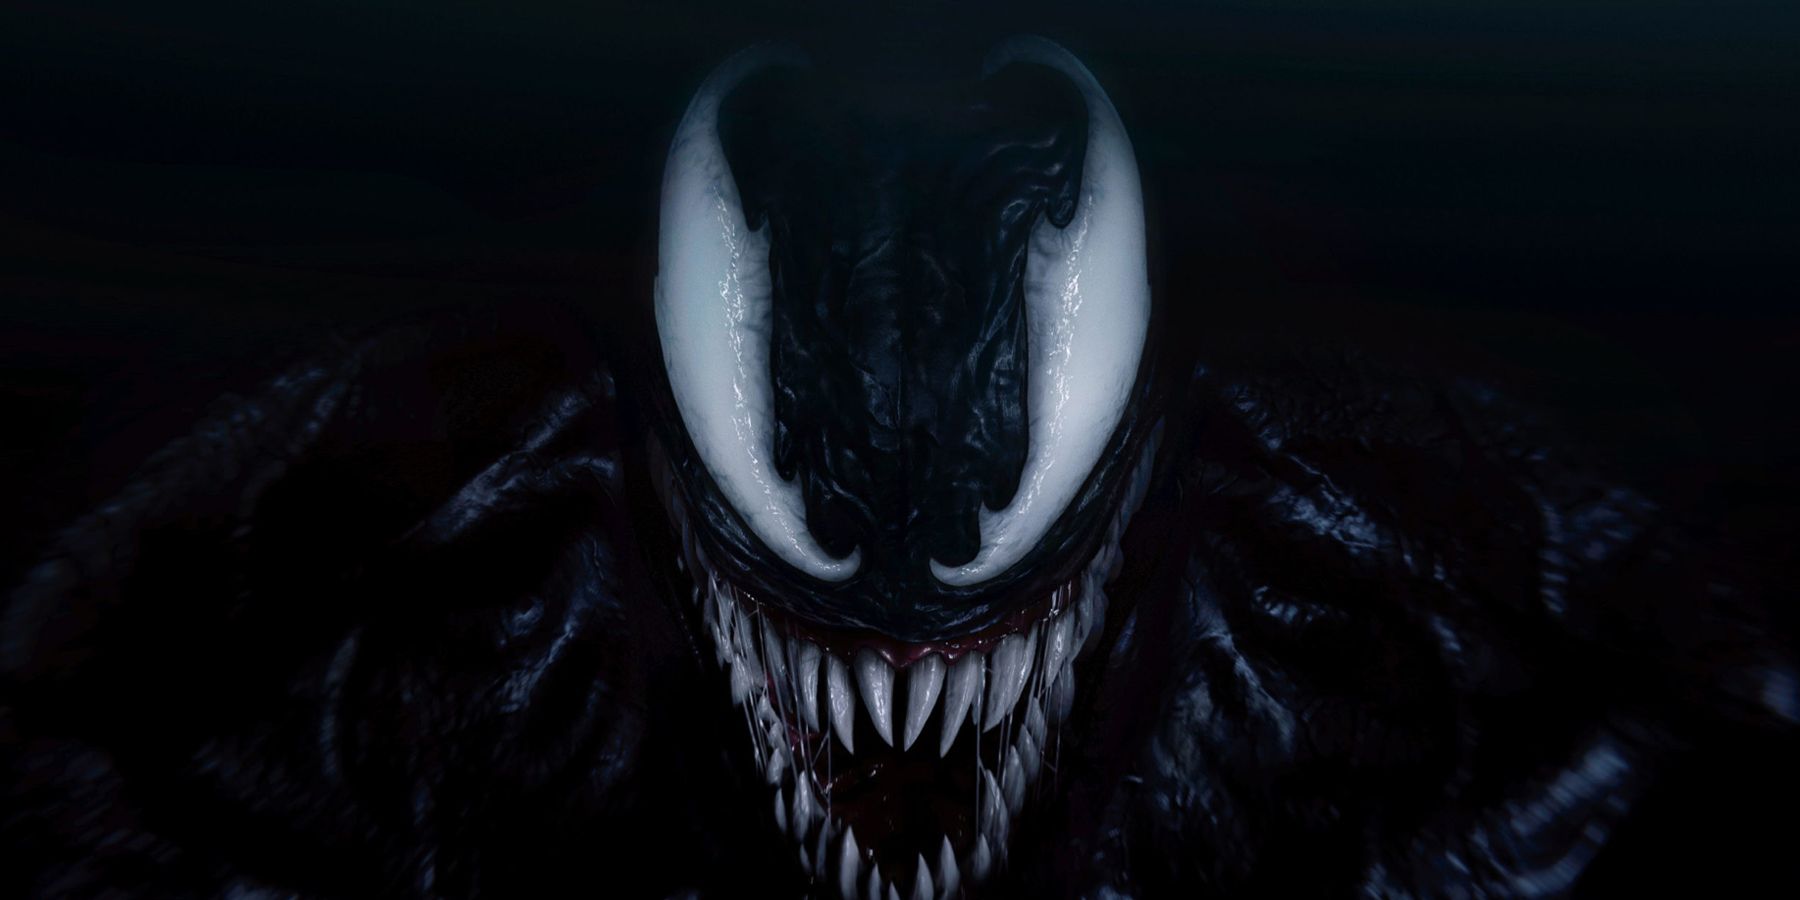 SpiderMan 2 Should Embrace Symbiotes Other Than Venom